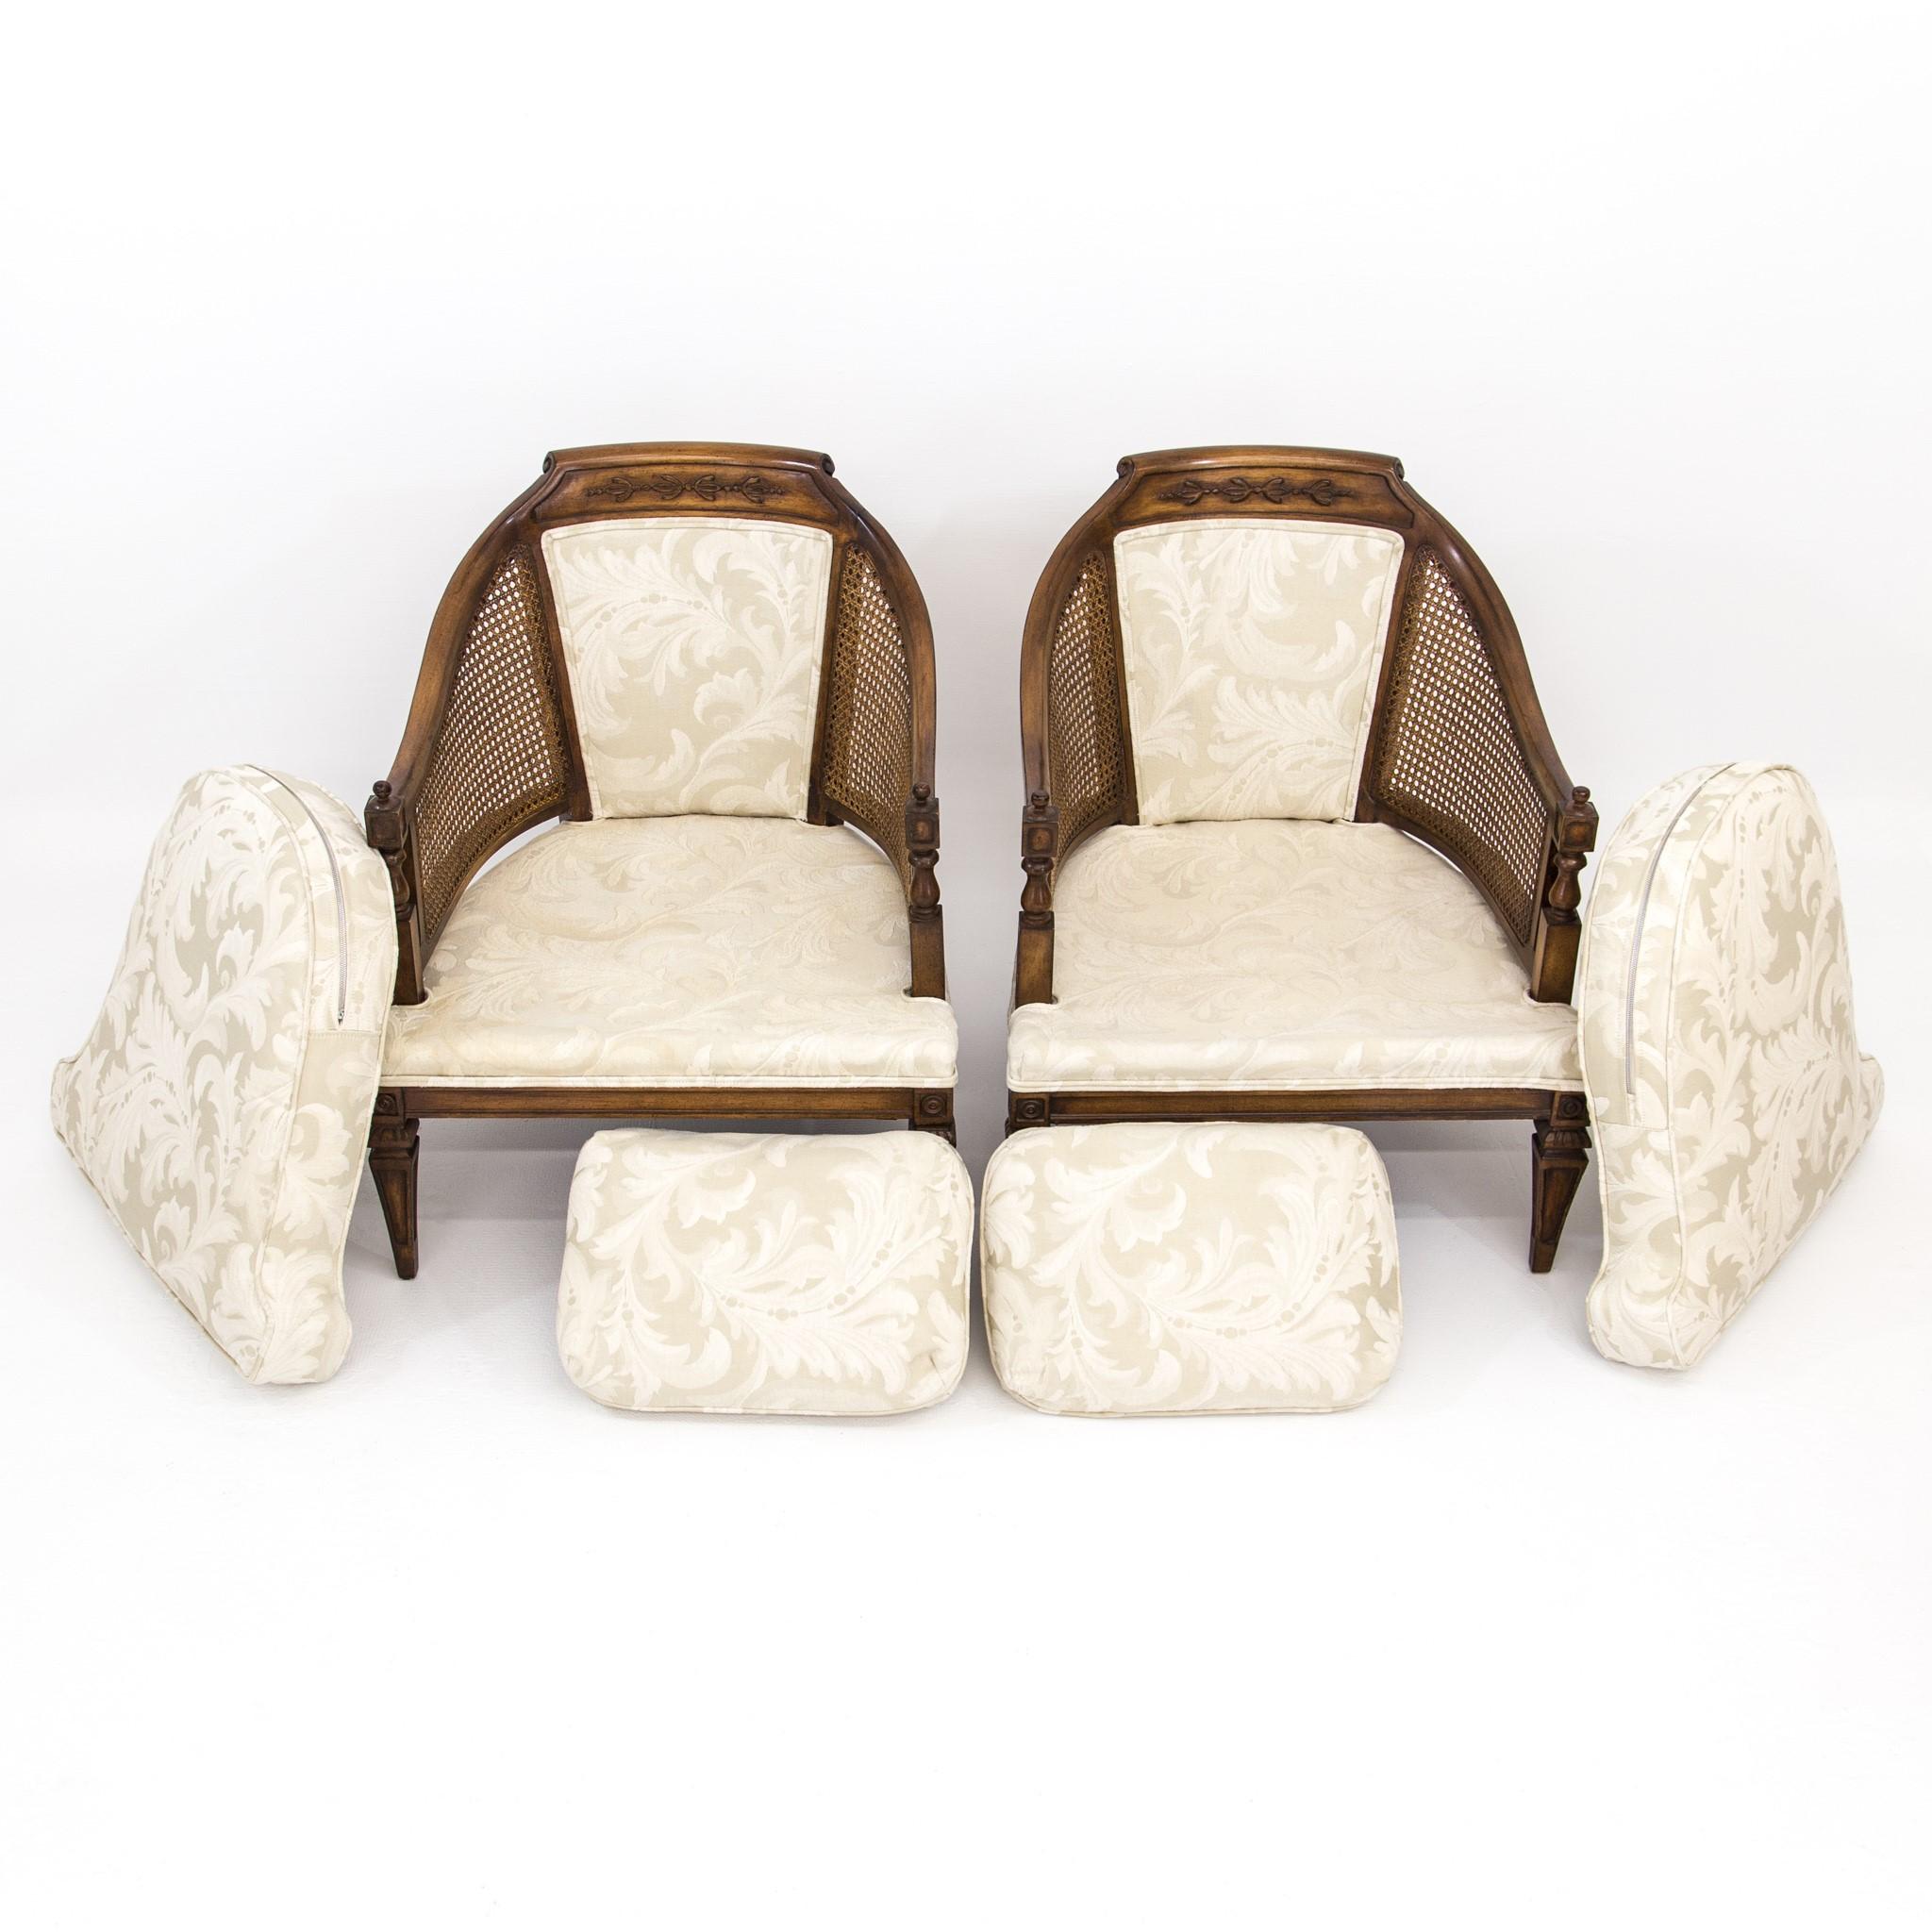 Pair of Mid-Century Walnut & Cane Barrel Back Club Chairs with White Upholstery 1